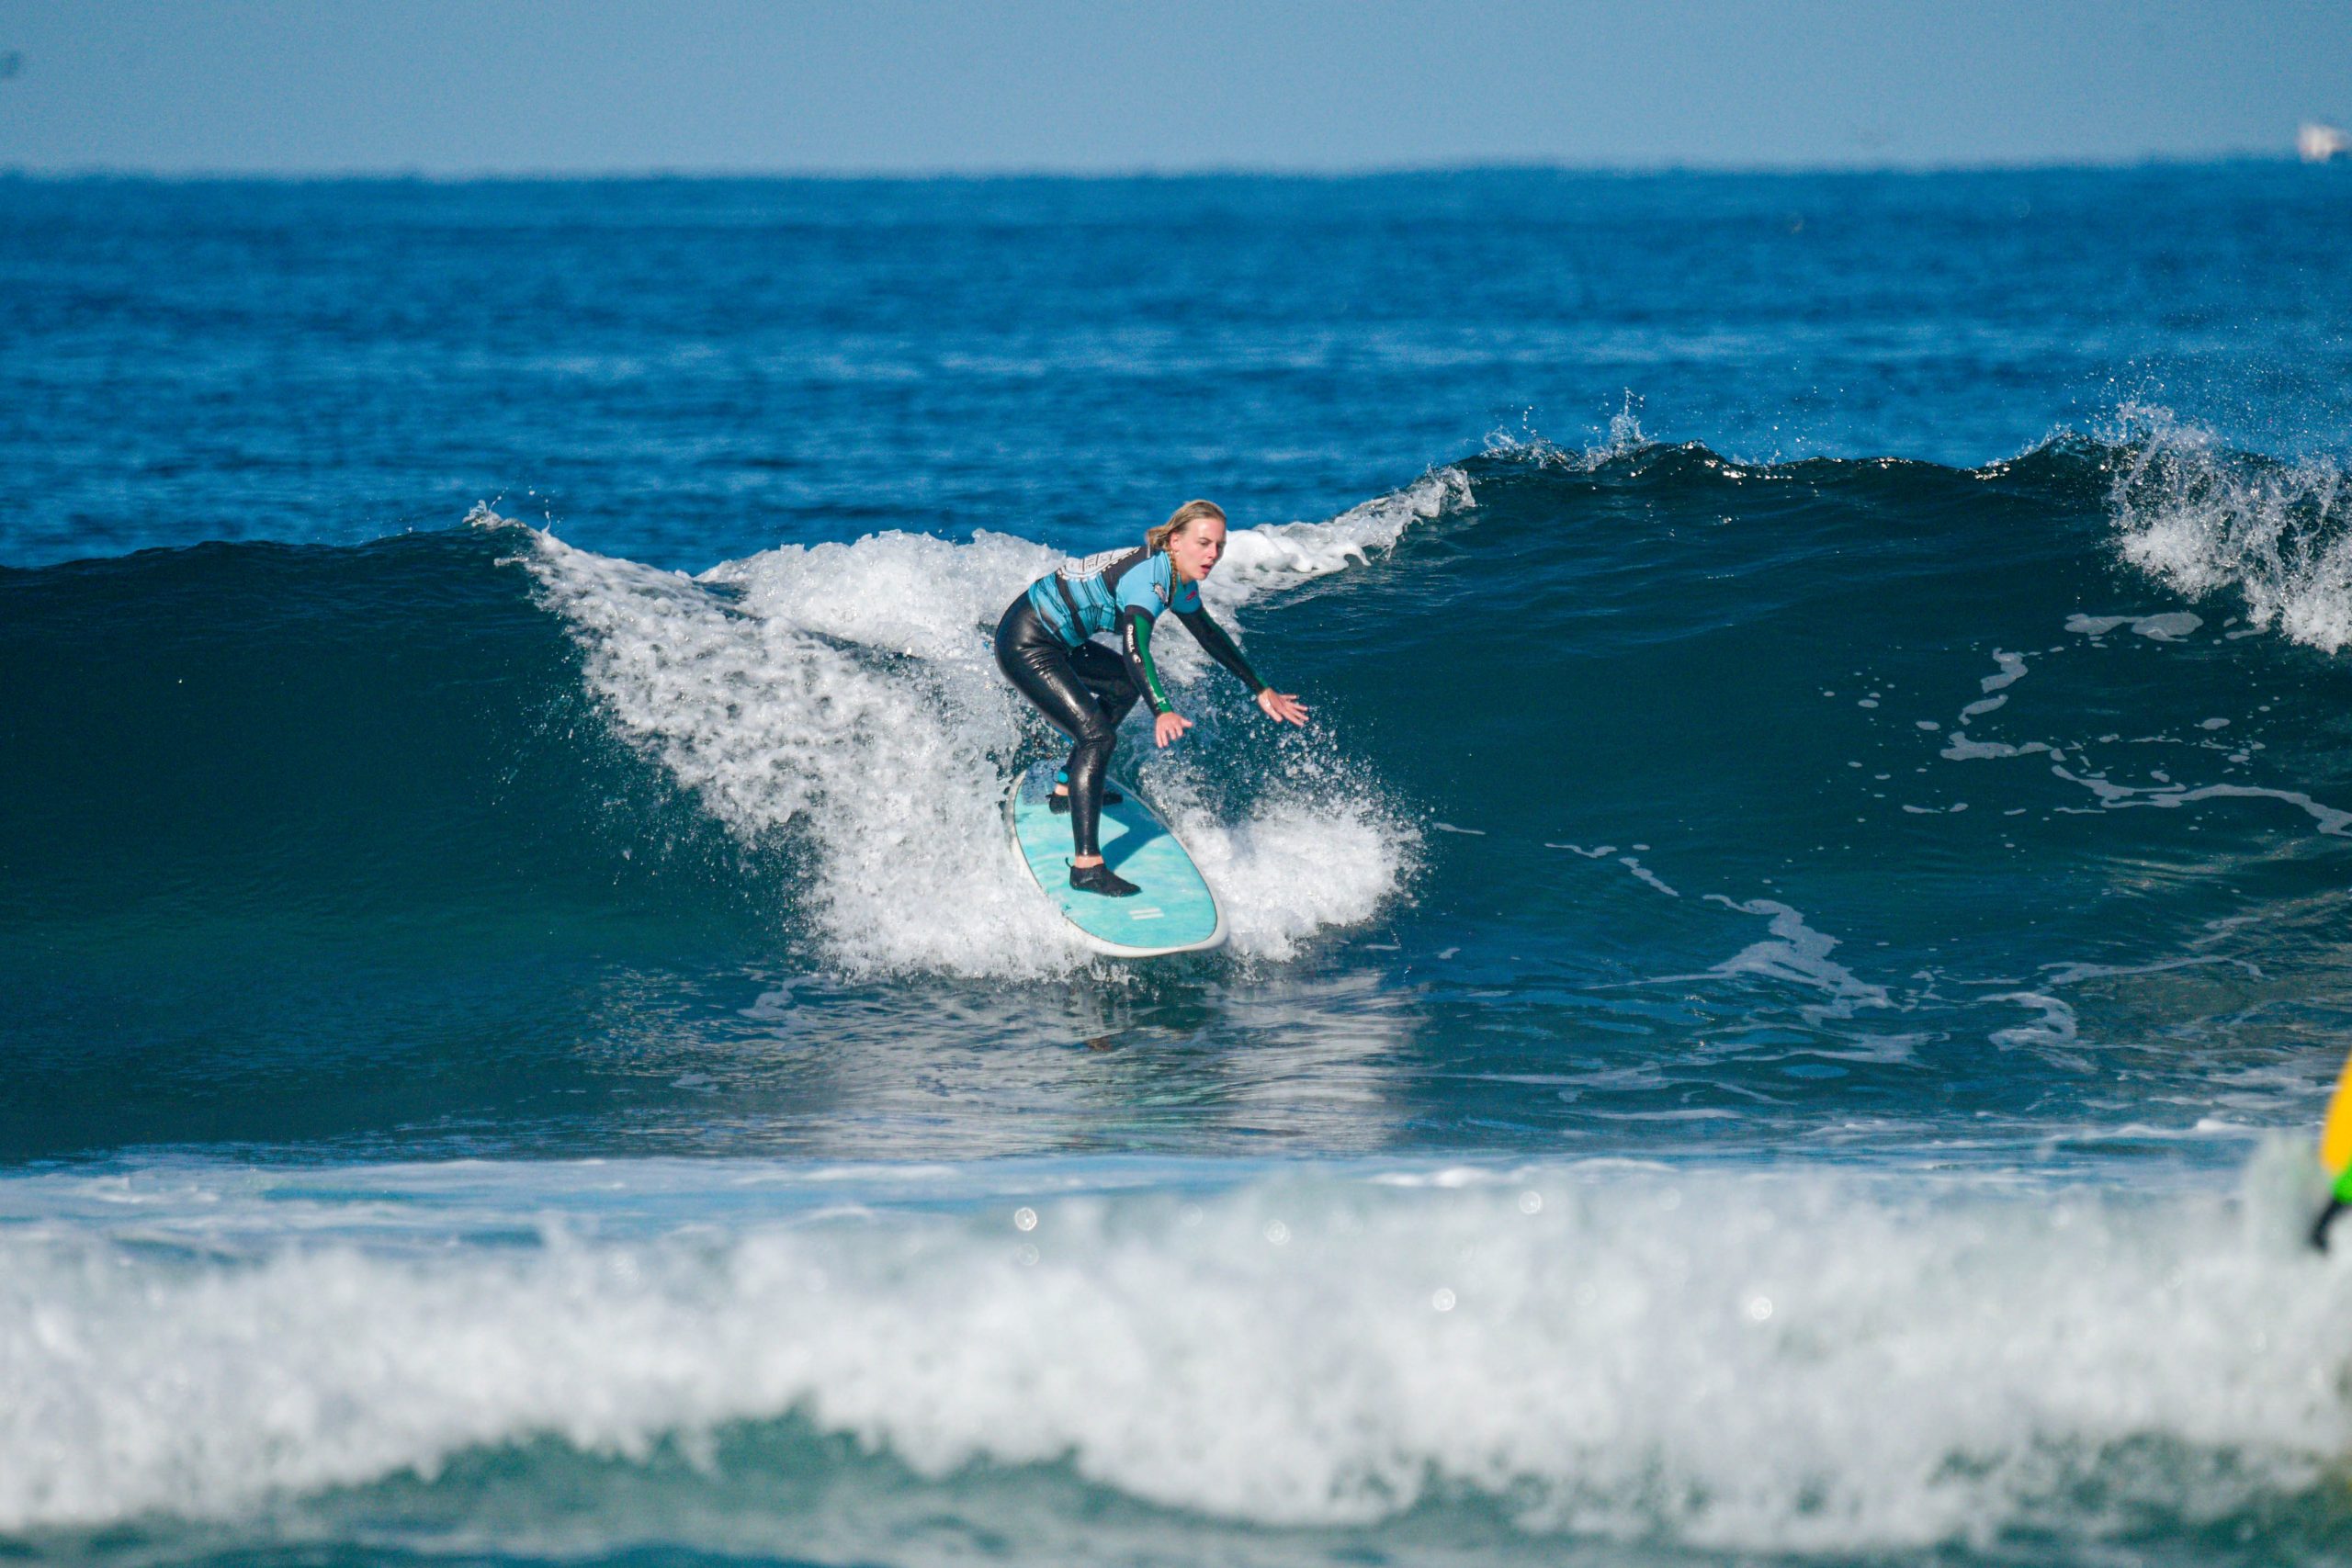 Blackstone Surf Center intermediate student surfing in Playa las Américas in Tenerife during a surf lesson